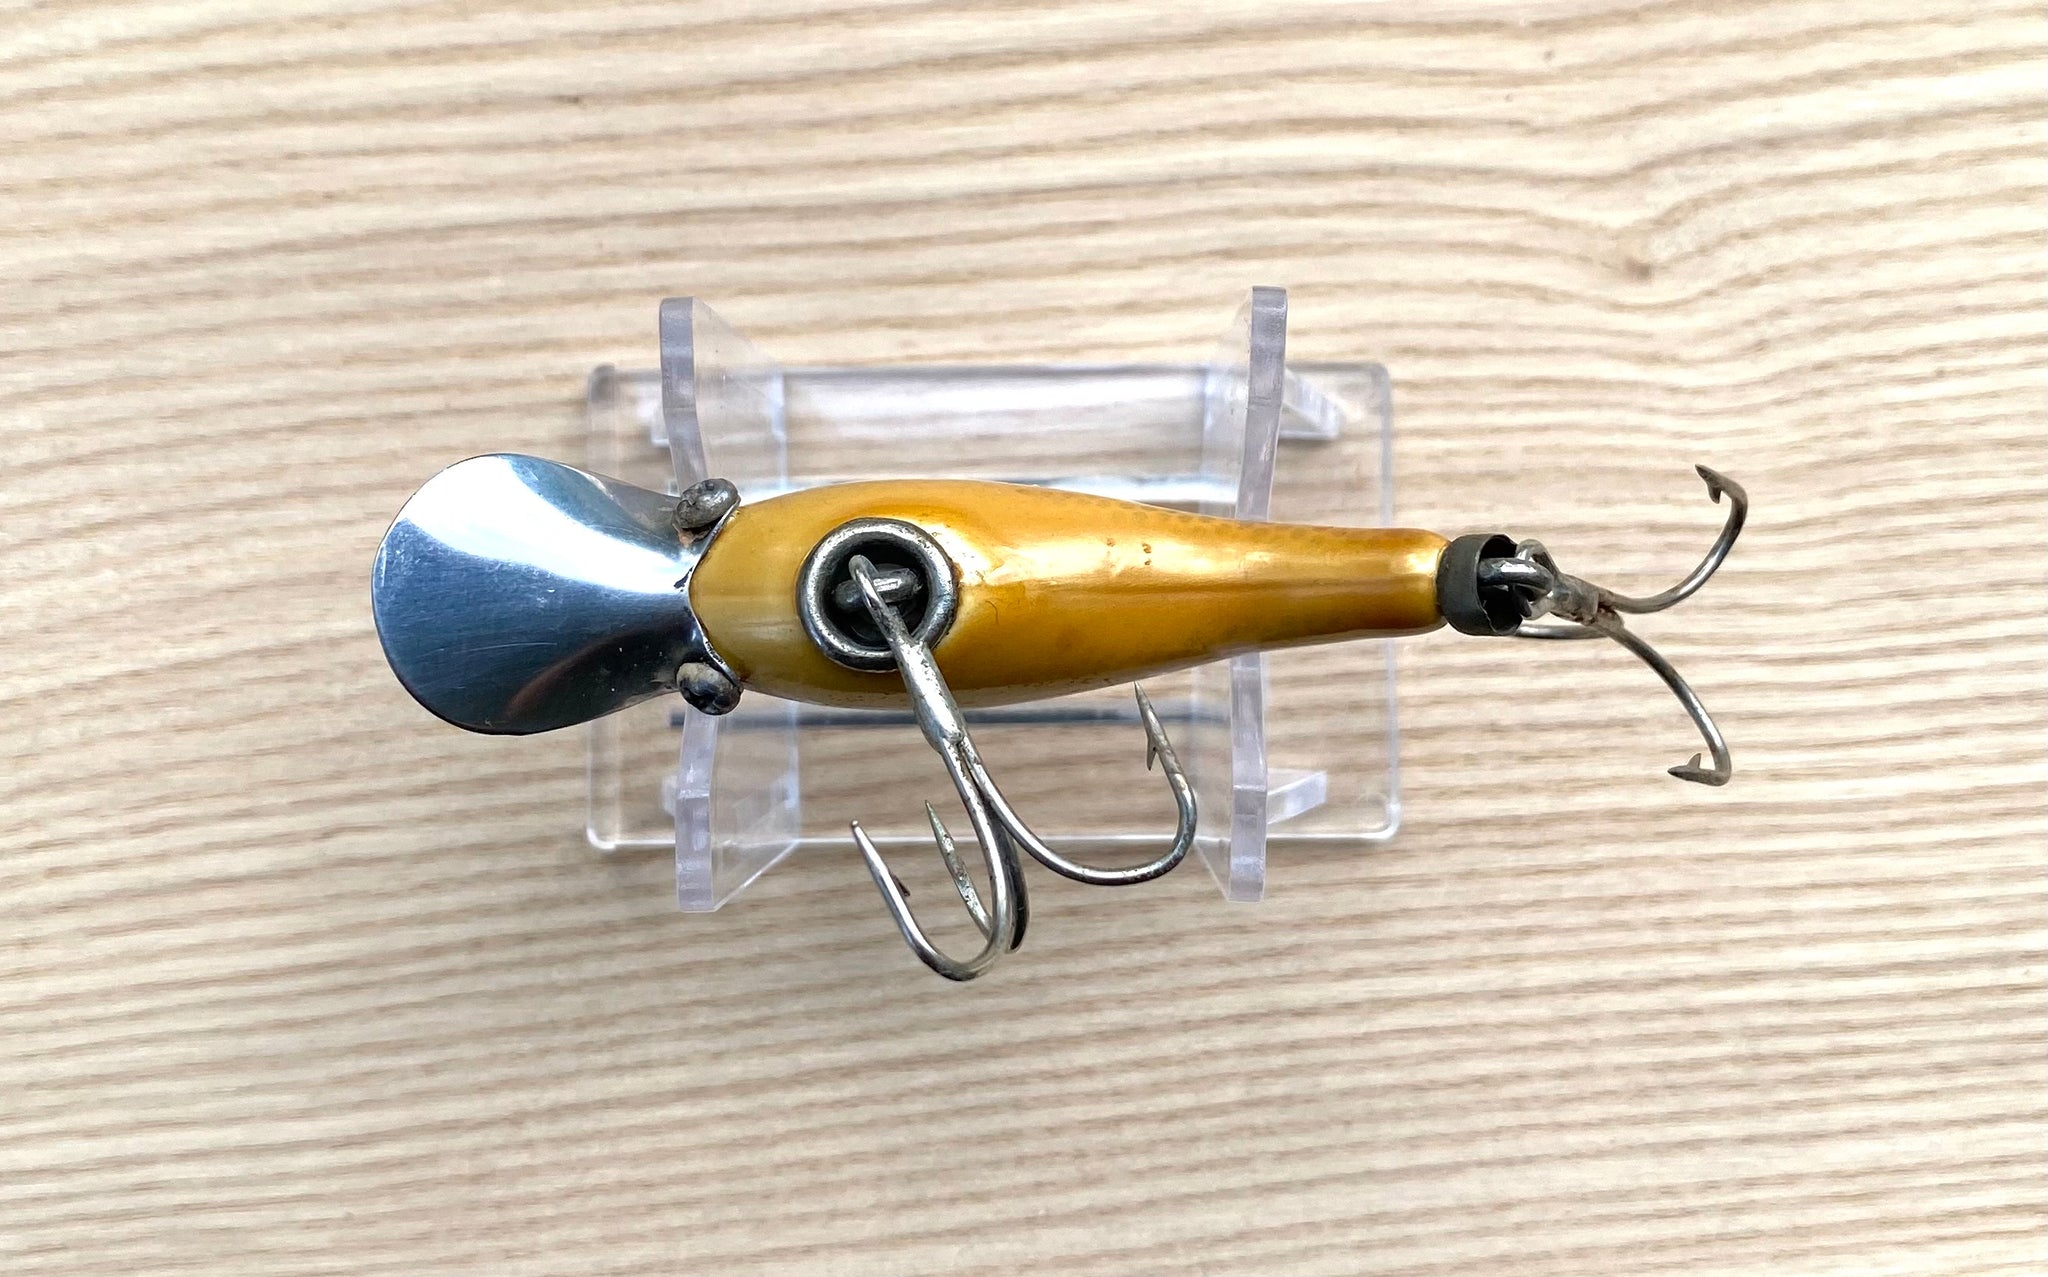 LITTLE ROCK • BOSHEARS TACKLE CO RAZZLE DAZZLE Fishing Lure – Toad Tackle